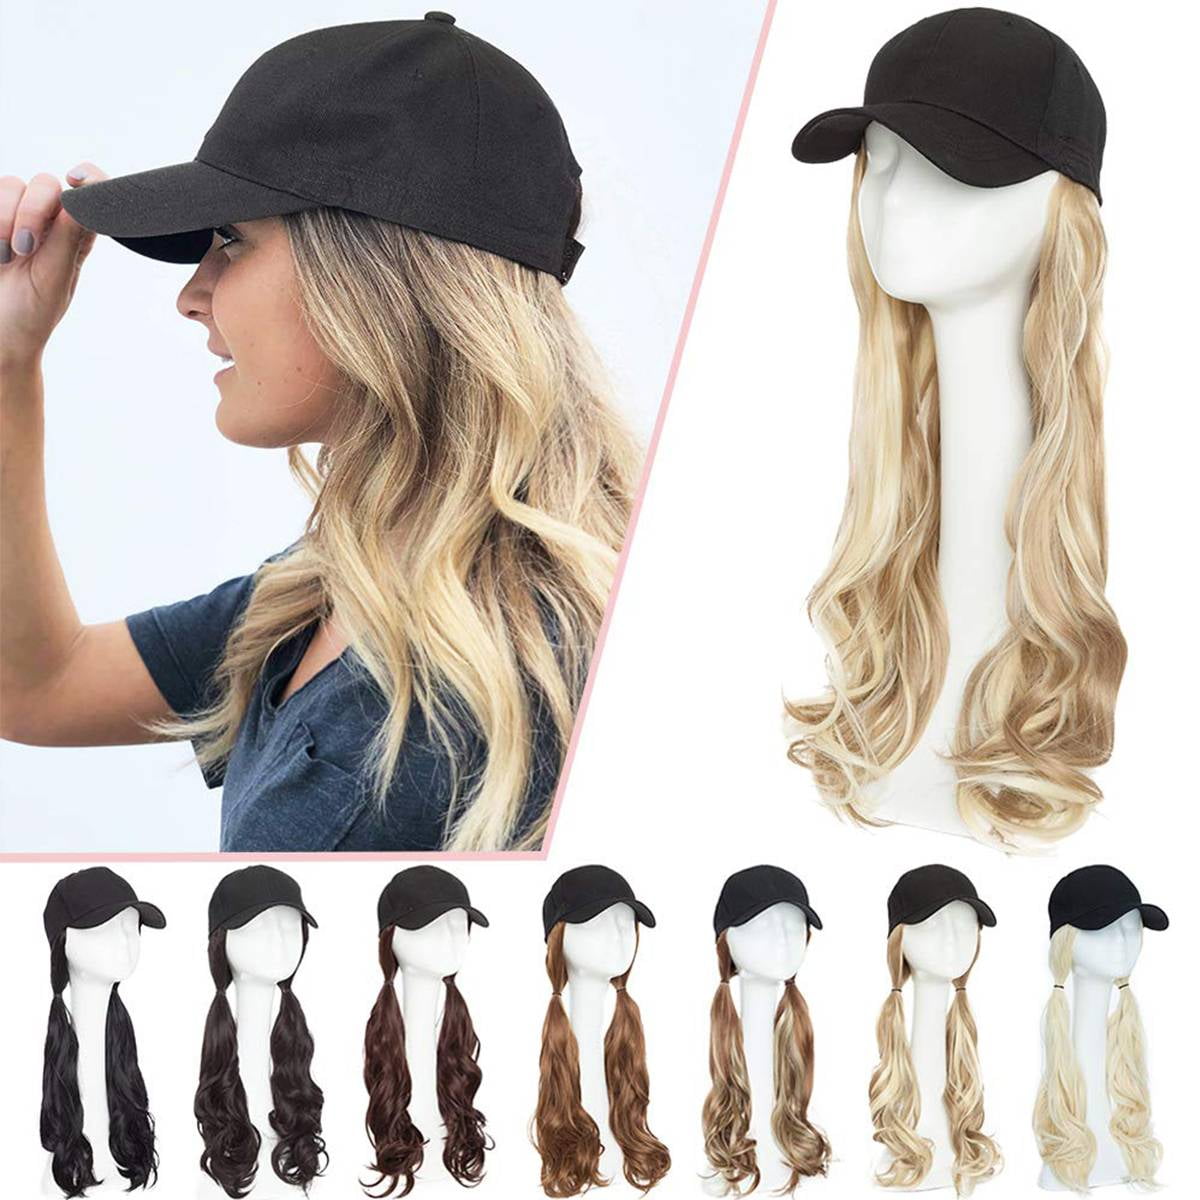 Sego Baseball Cap Wigs Synthetic Long Curly Wavy Wig Hat Hair Extensions Attached Hairpieces For 